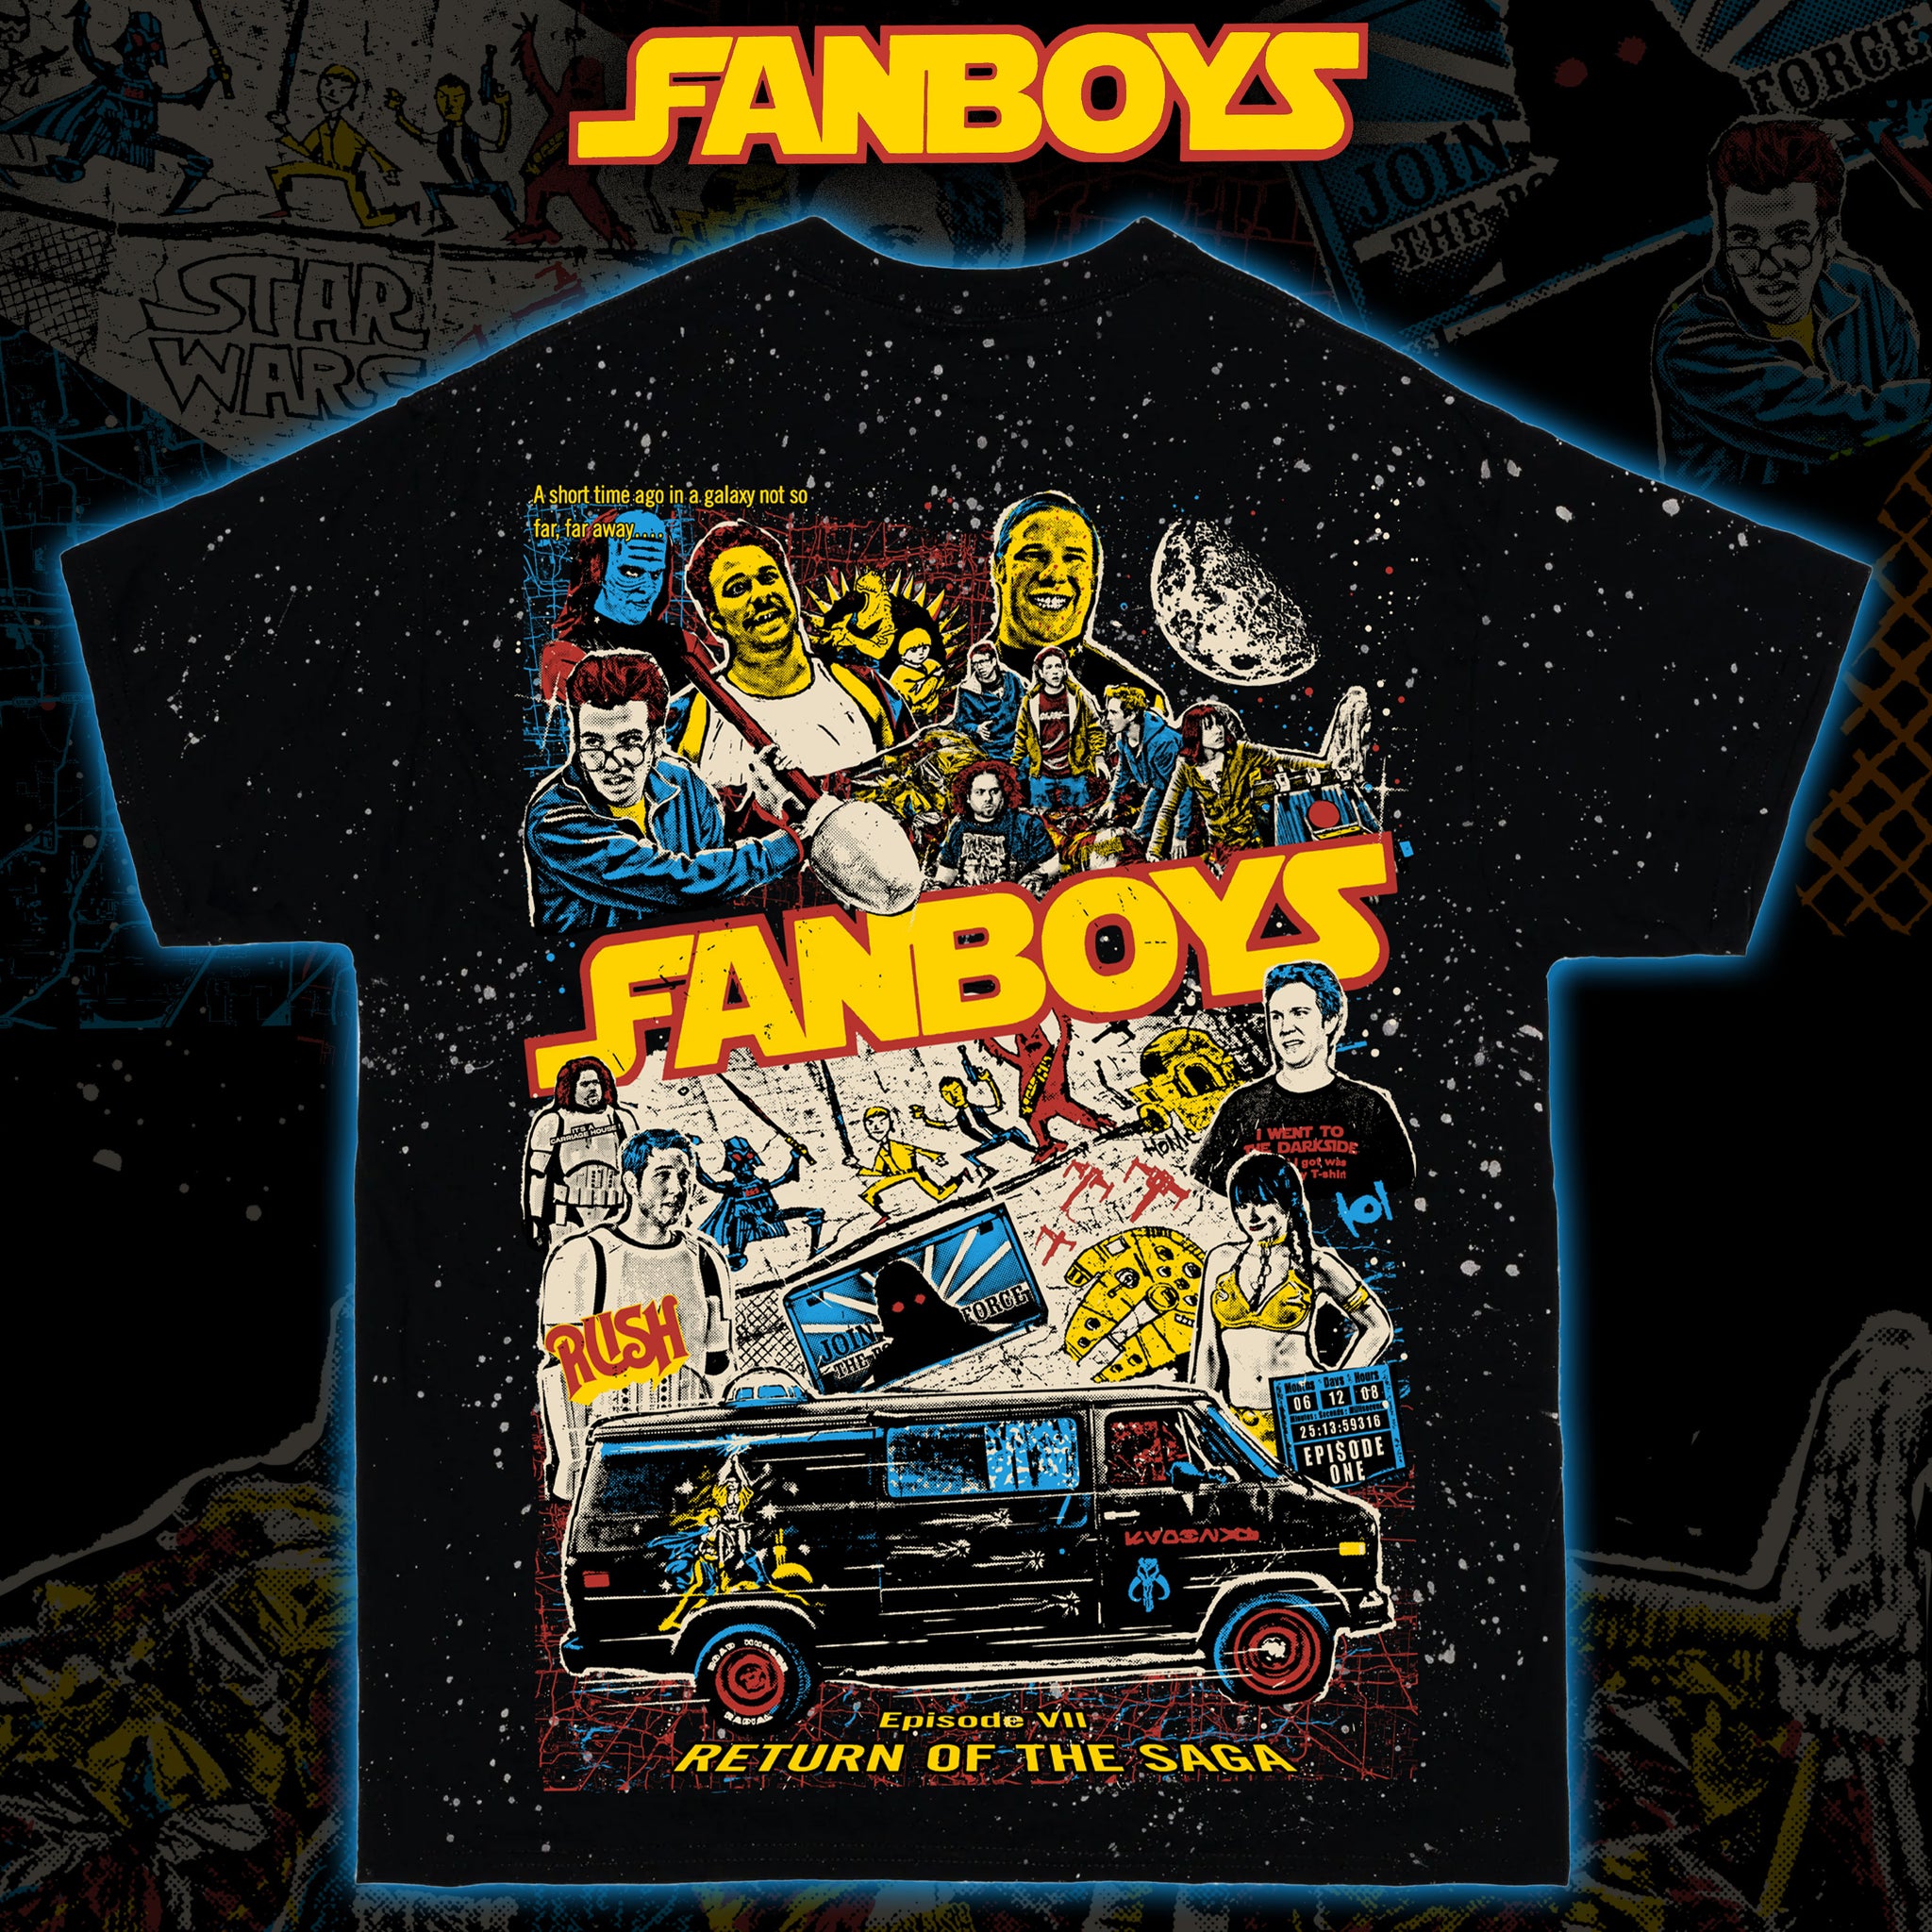 Fanboys "Passage to the Stars" Tie dye